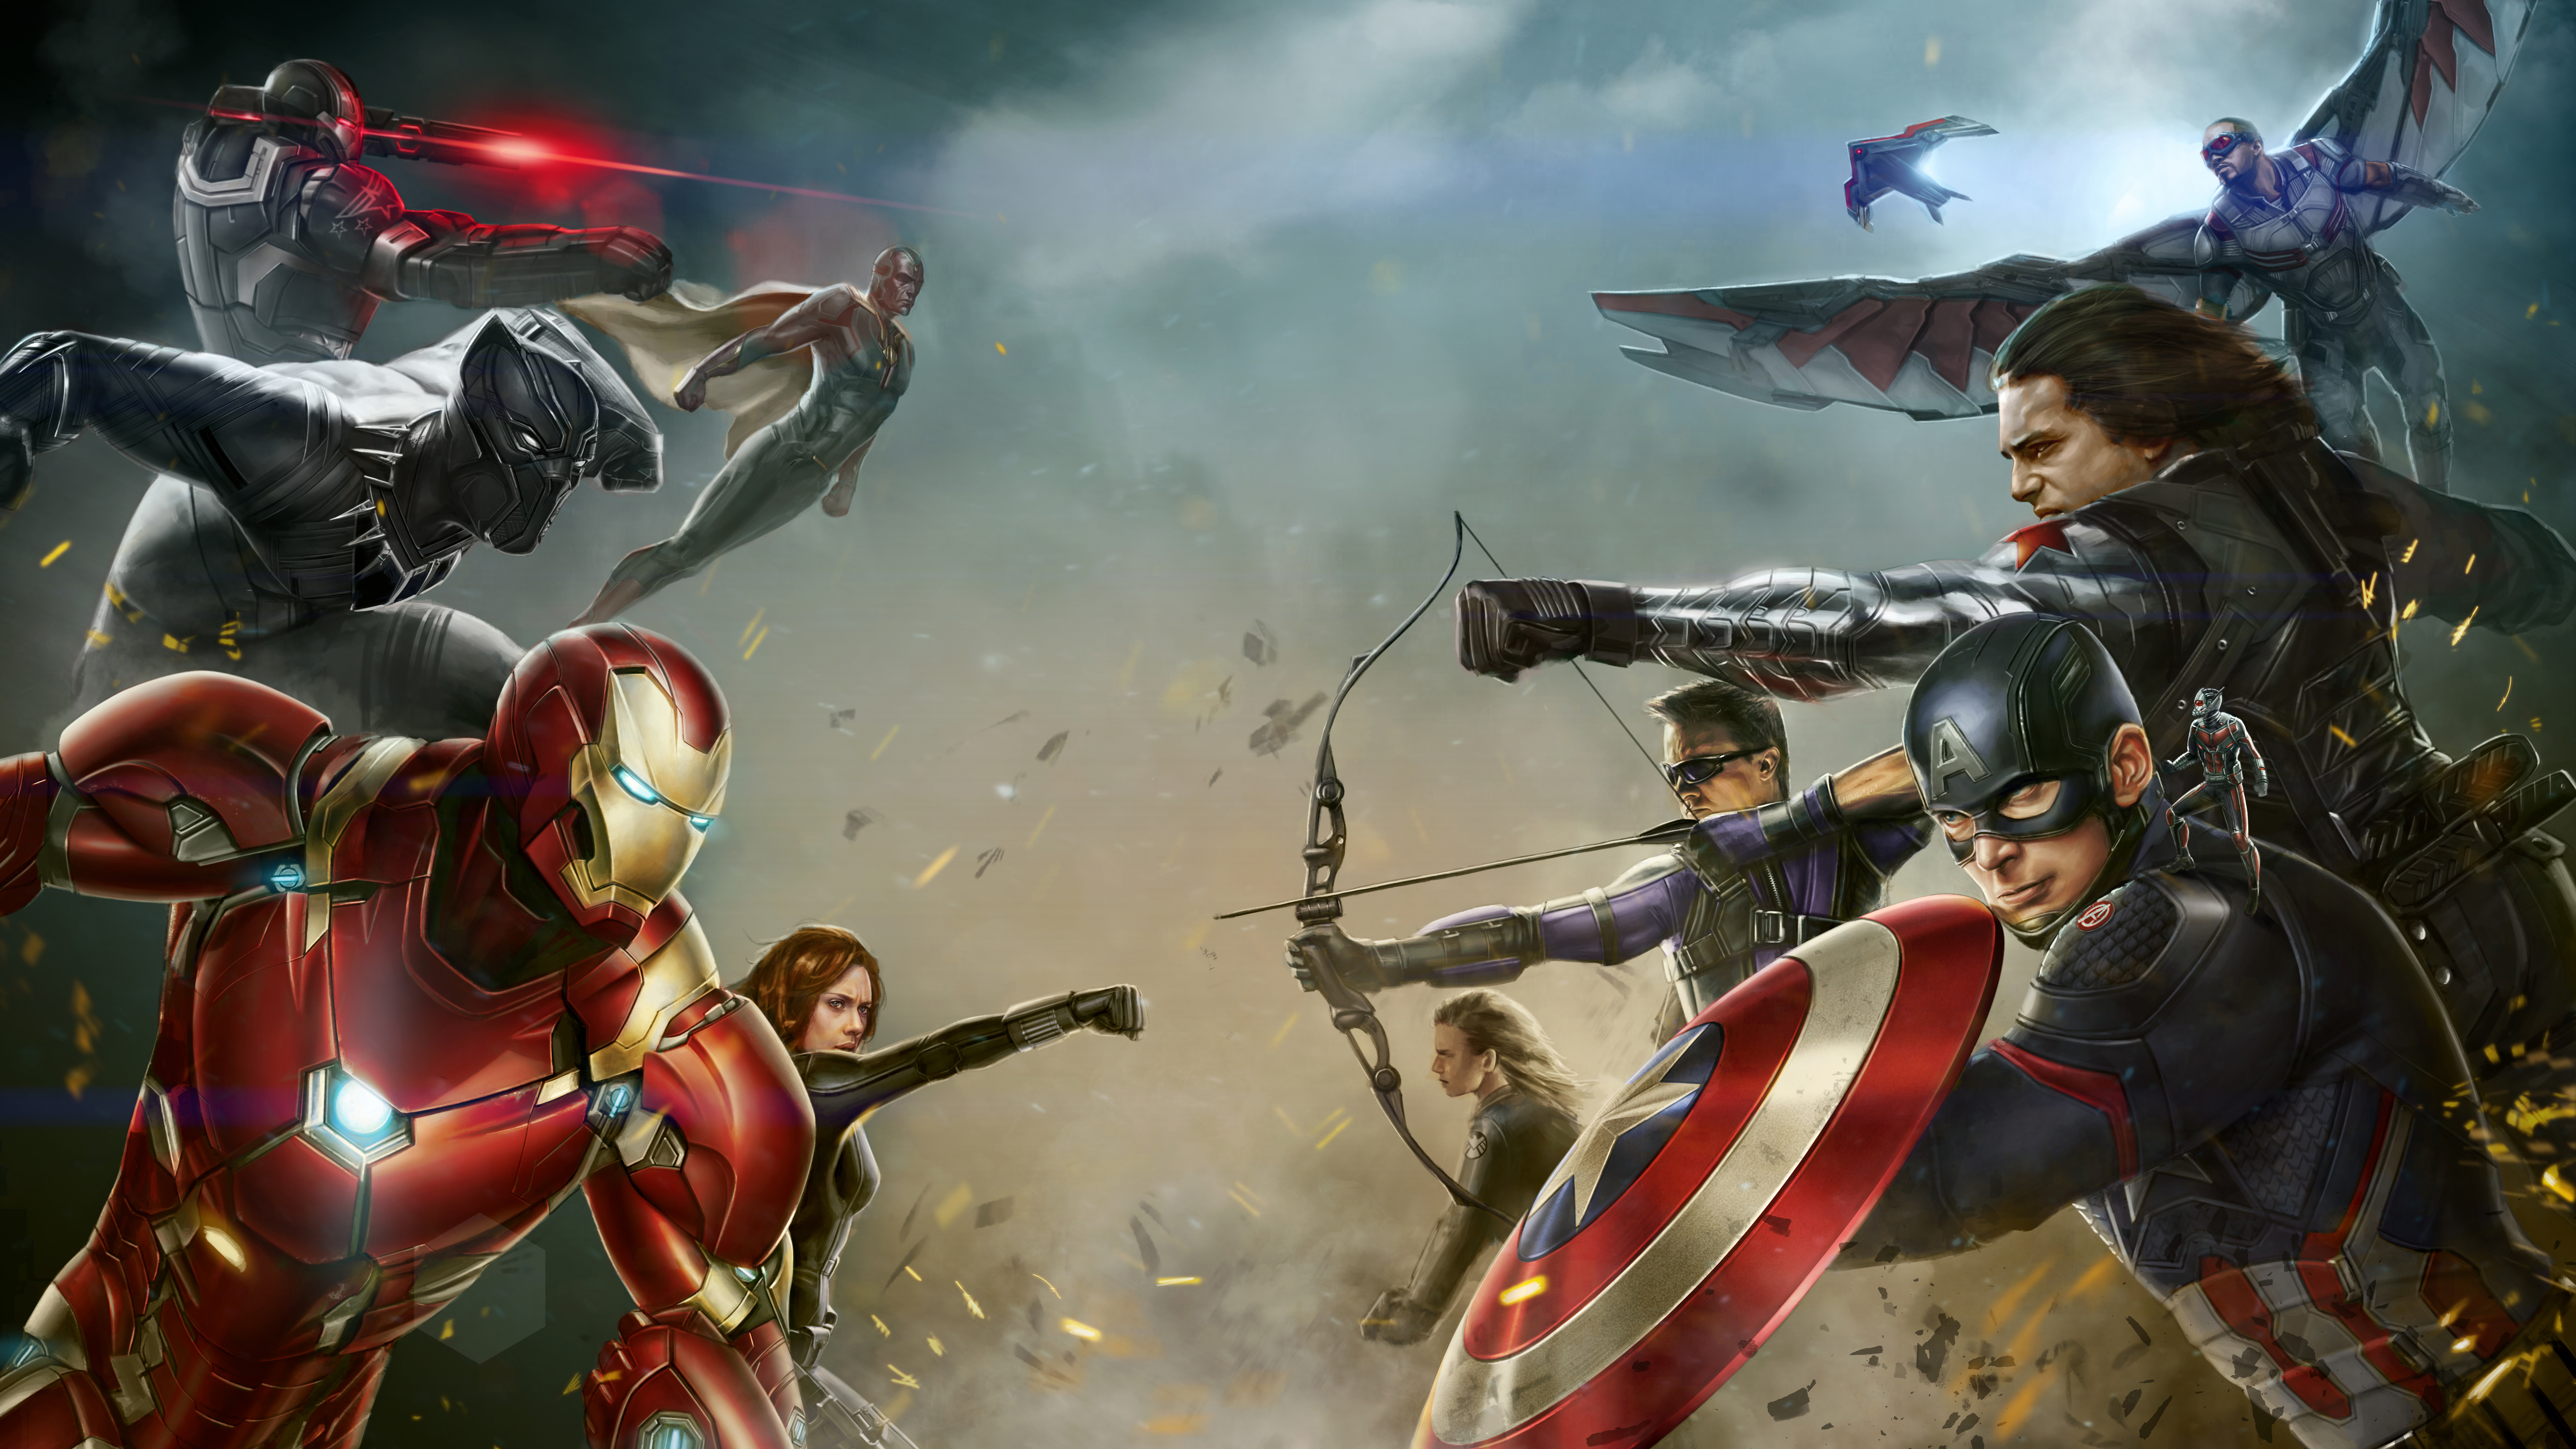 marvel superheroes hd wallpapers,action adventure game,fictional character,cg artwork,superhero,strategy video game